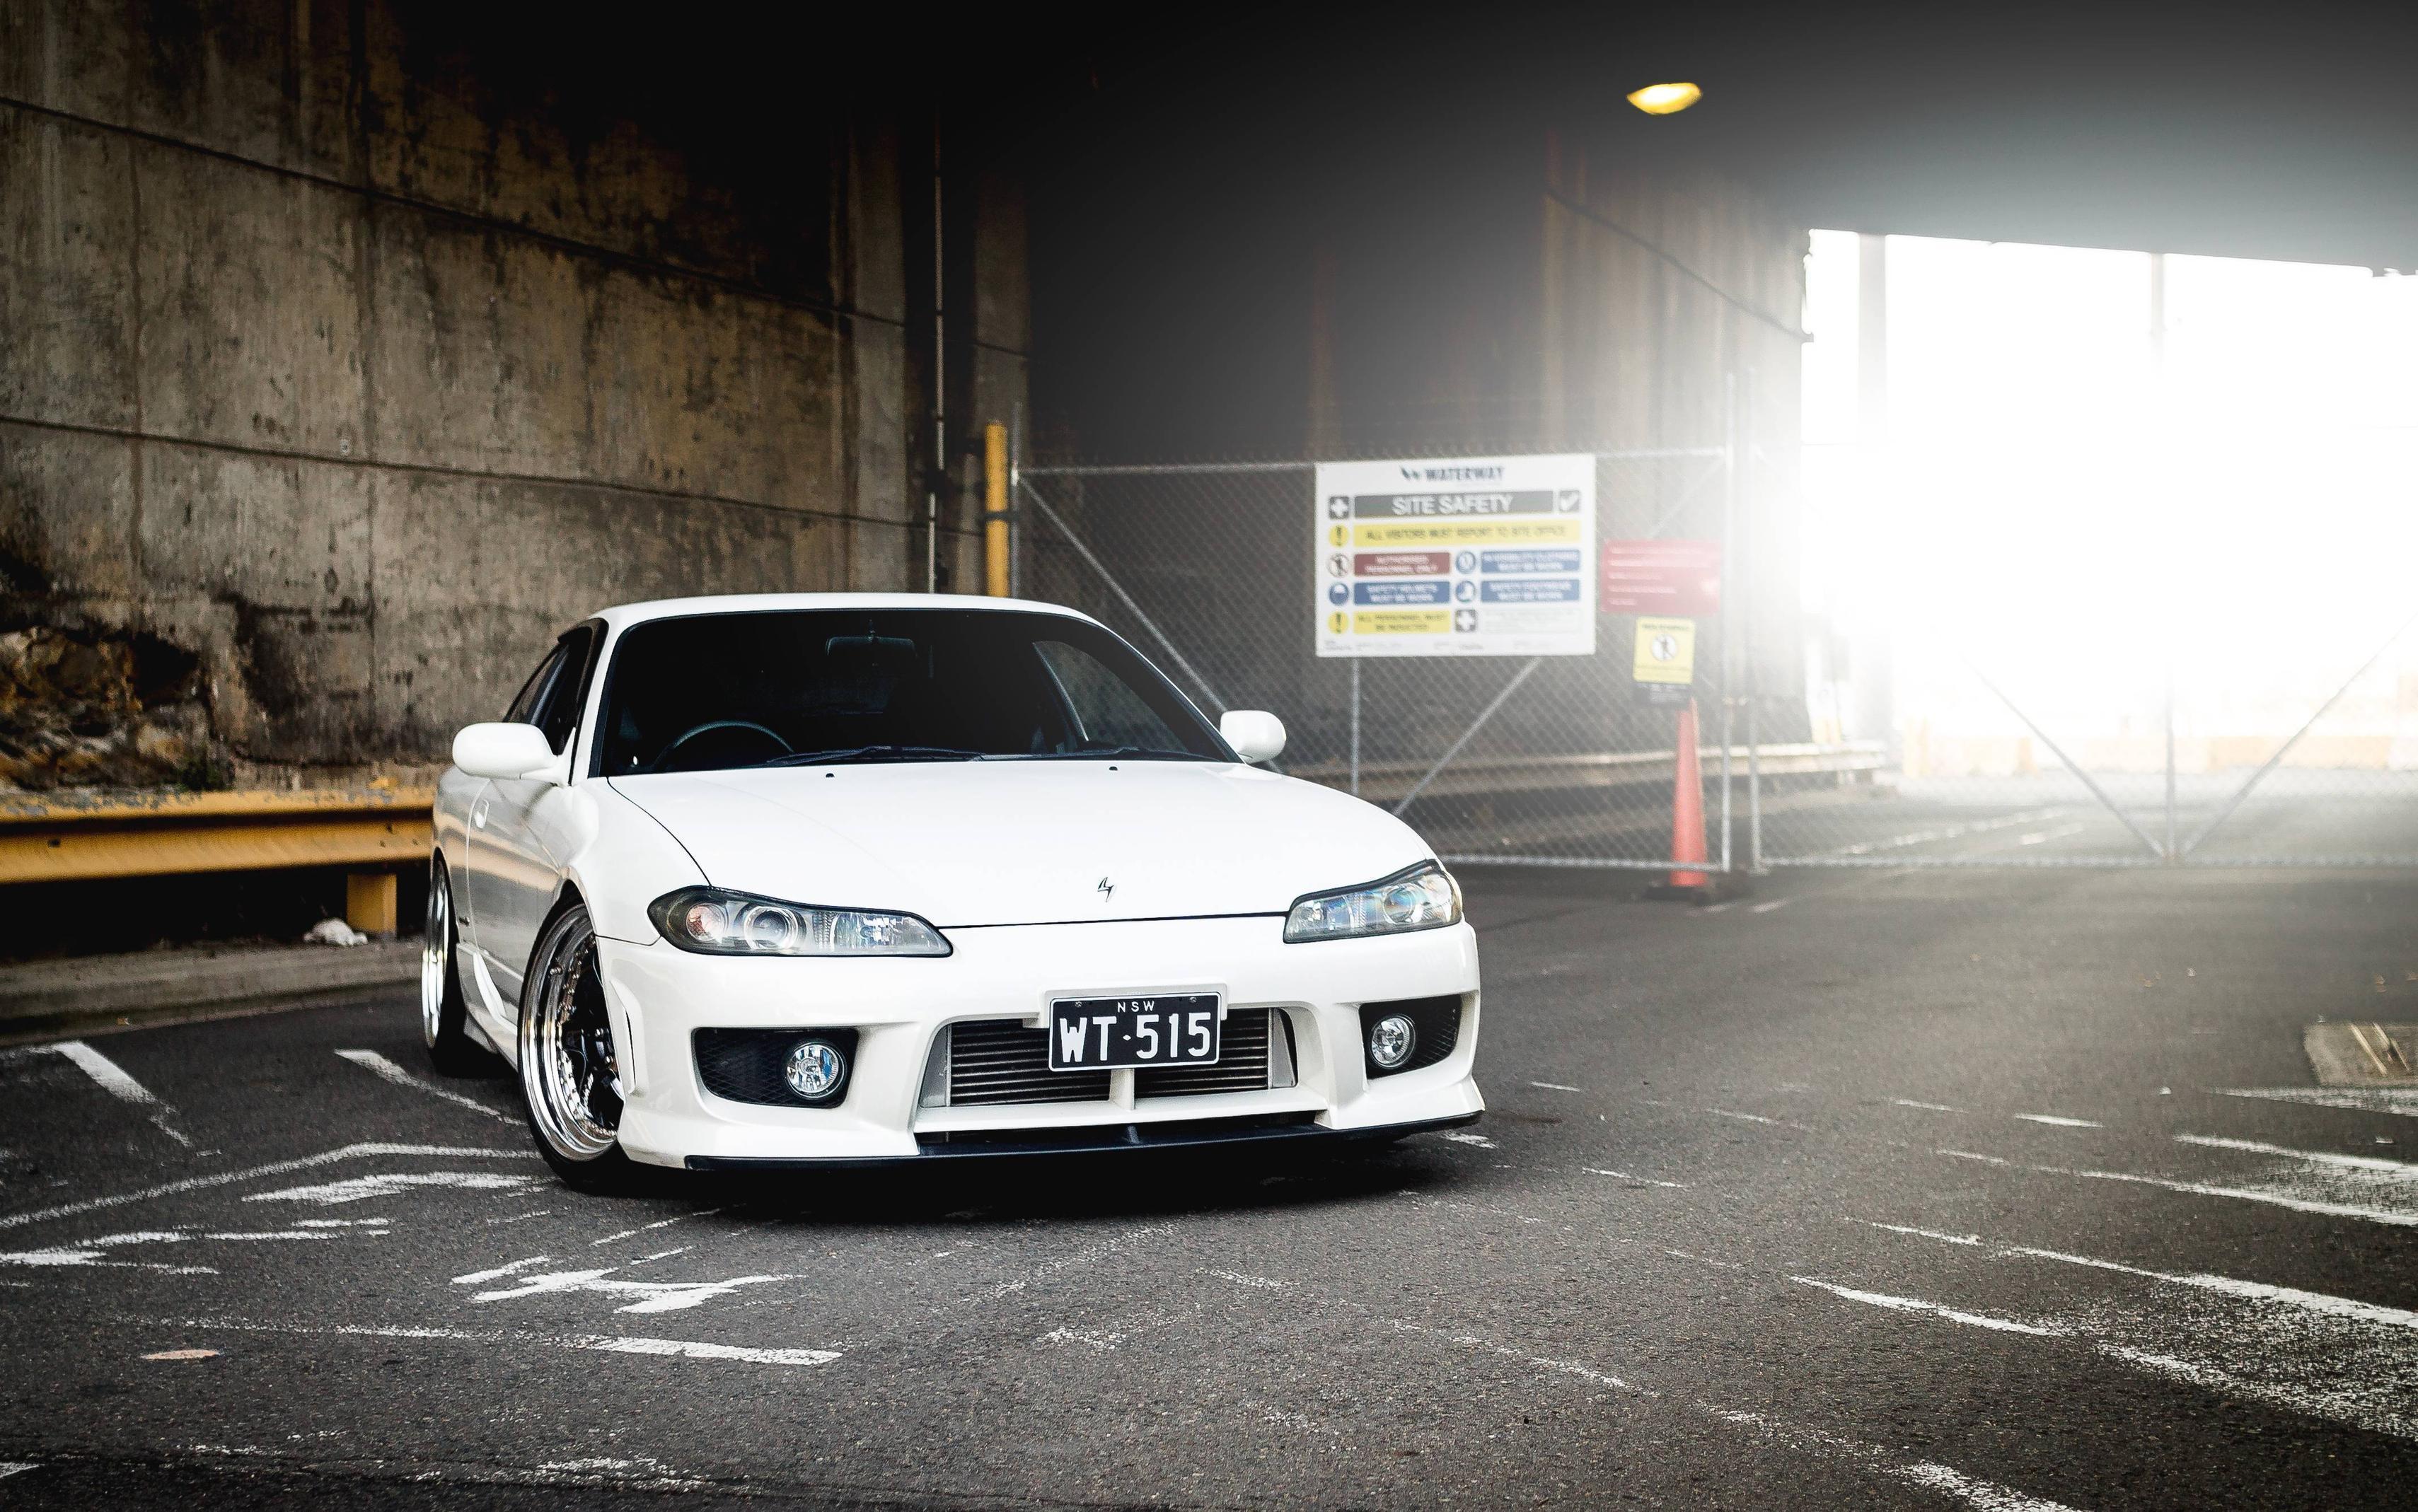 Vehicles Nissan Silvia S15 Wallpaper 4272x2672 px Free Download